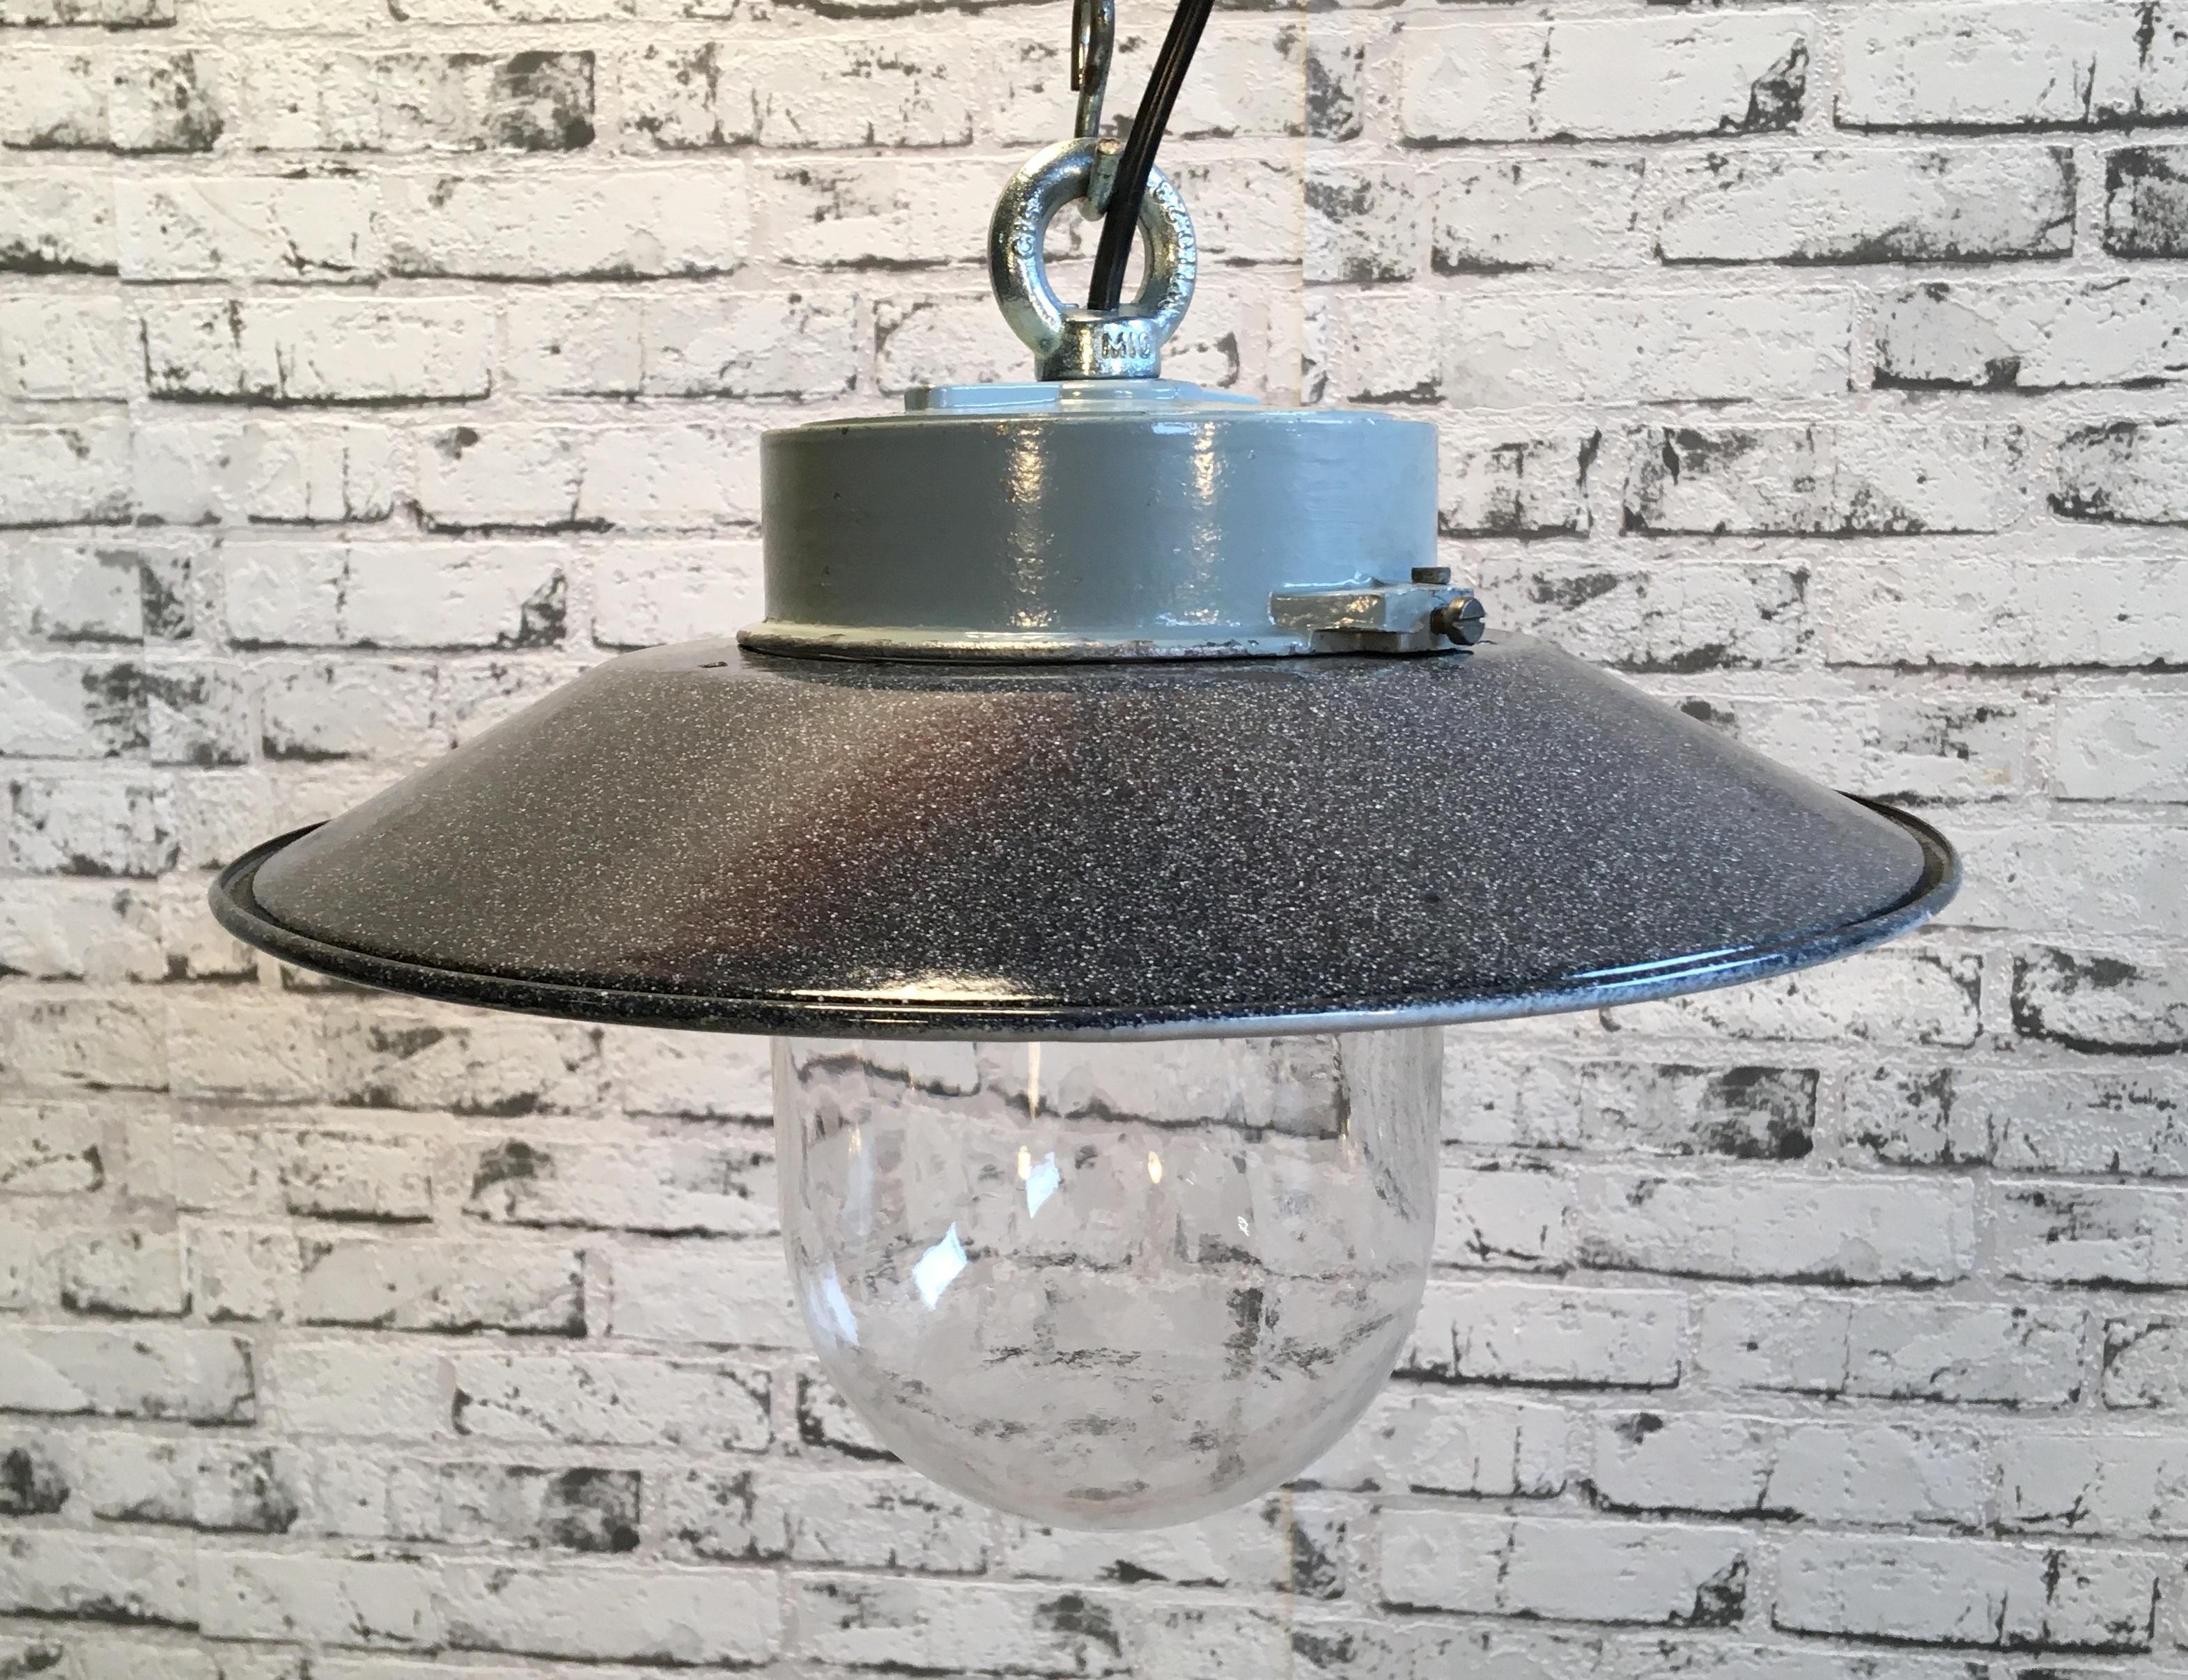 Vintage industrial lamp from 1970s.
Cast aluminium top. Enamel shade. Clear glass.
New porcelain socket  for E 27 lightbulbs and wire.